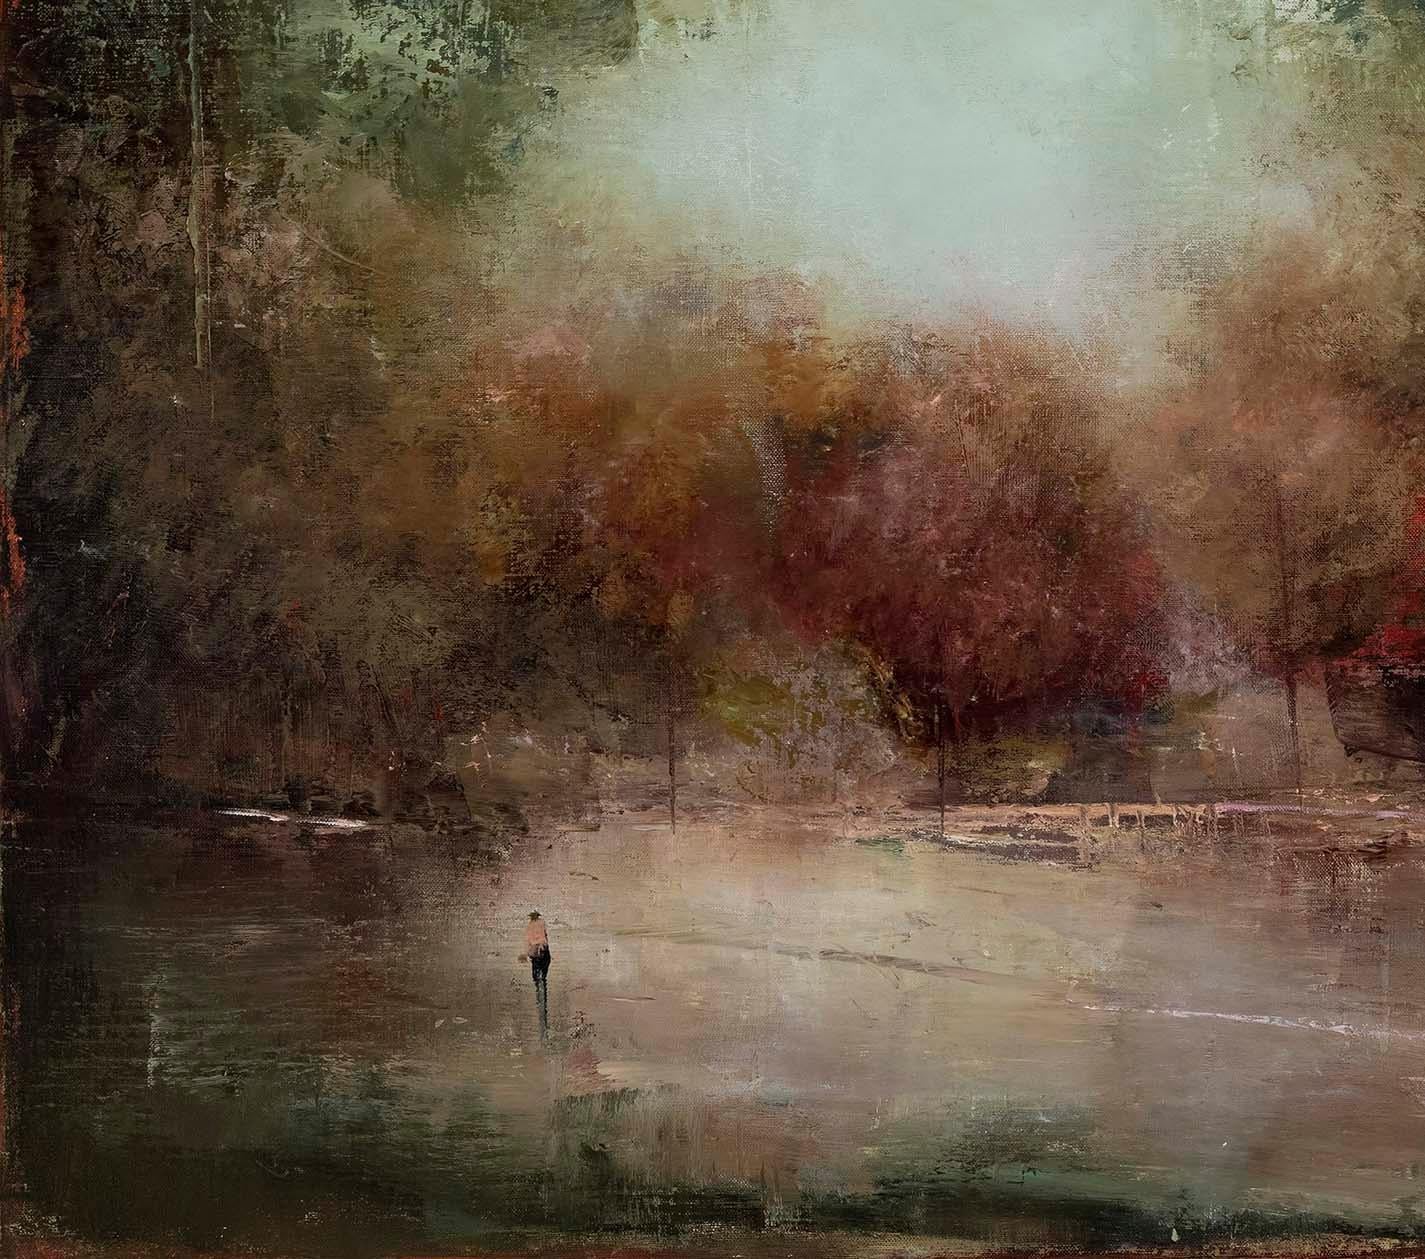 Such Wisdom in the Agitated Motions of the Winds - Painting by France Jodoin